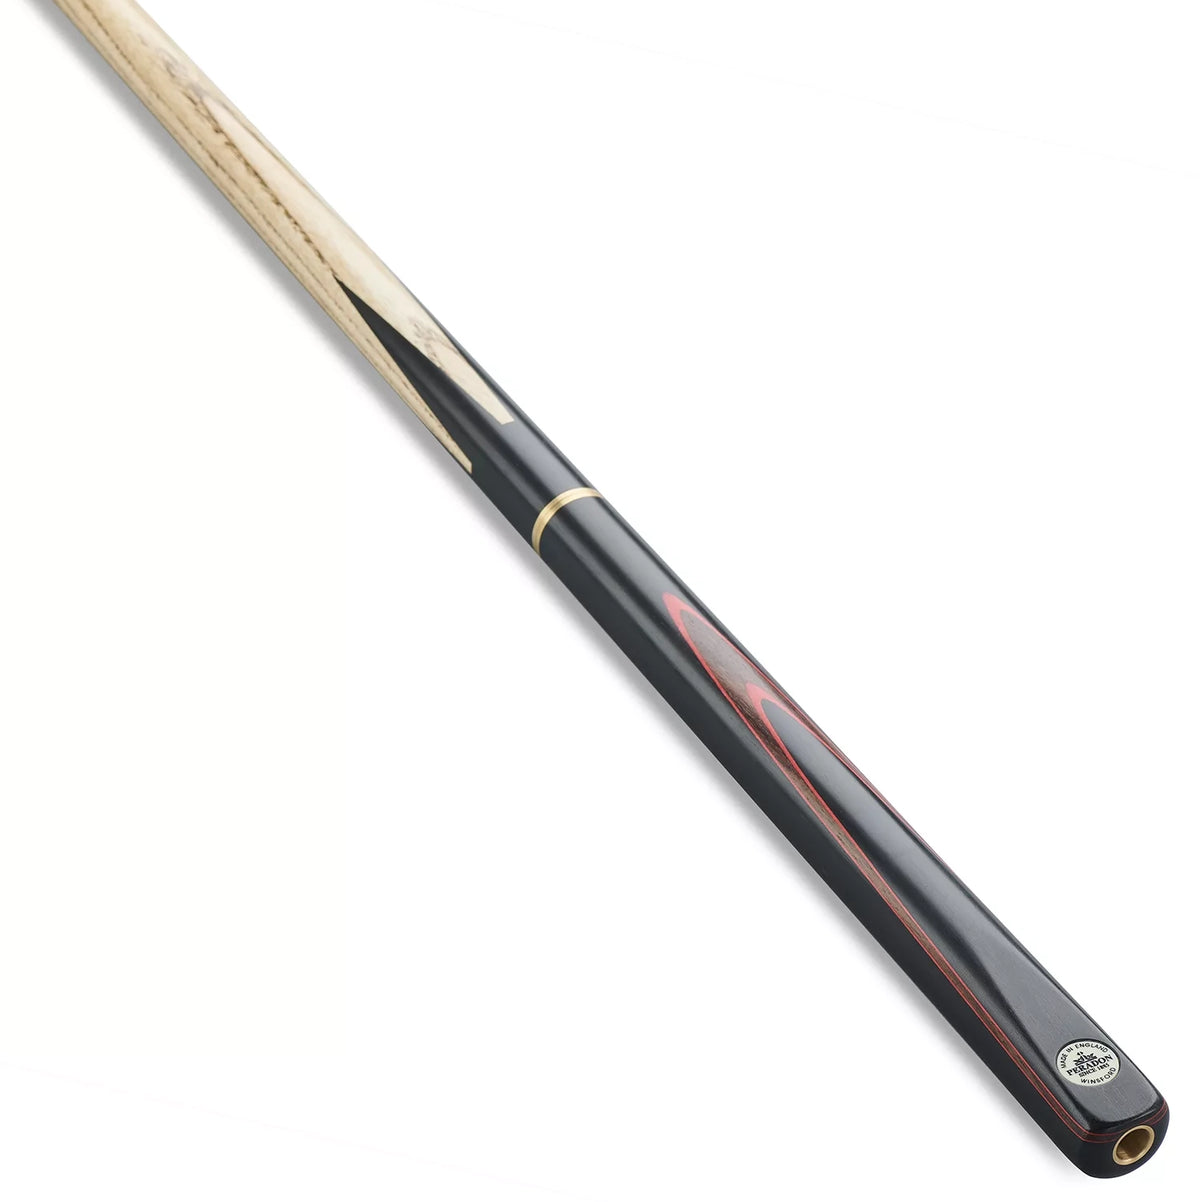 Peradon Winsford 3/4 Jointed Snooker Cue. Butt view